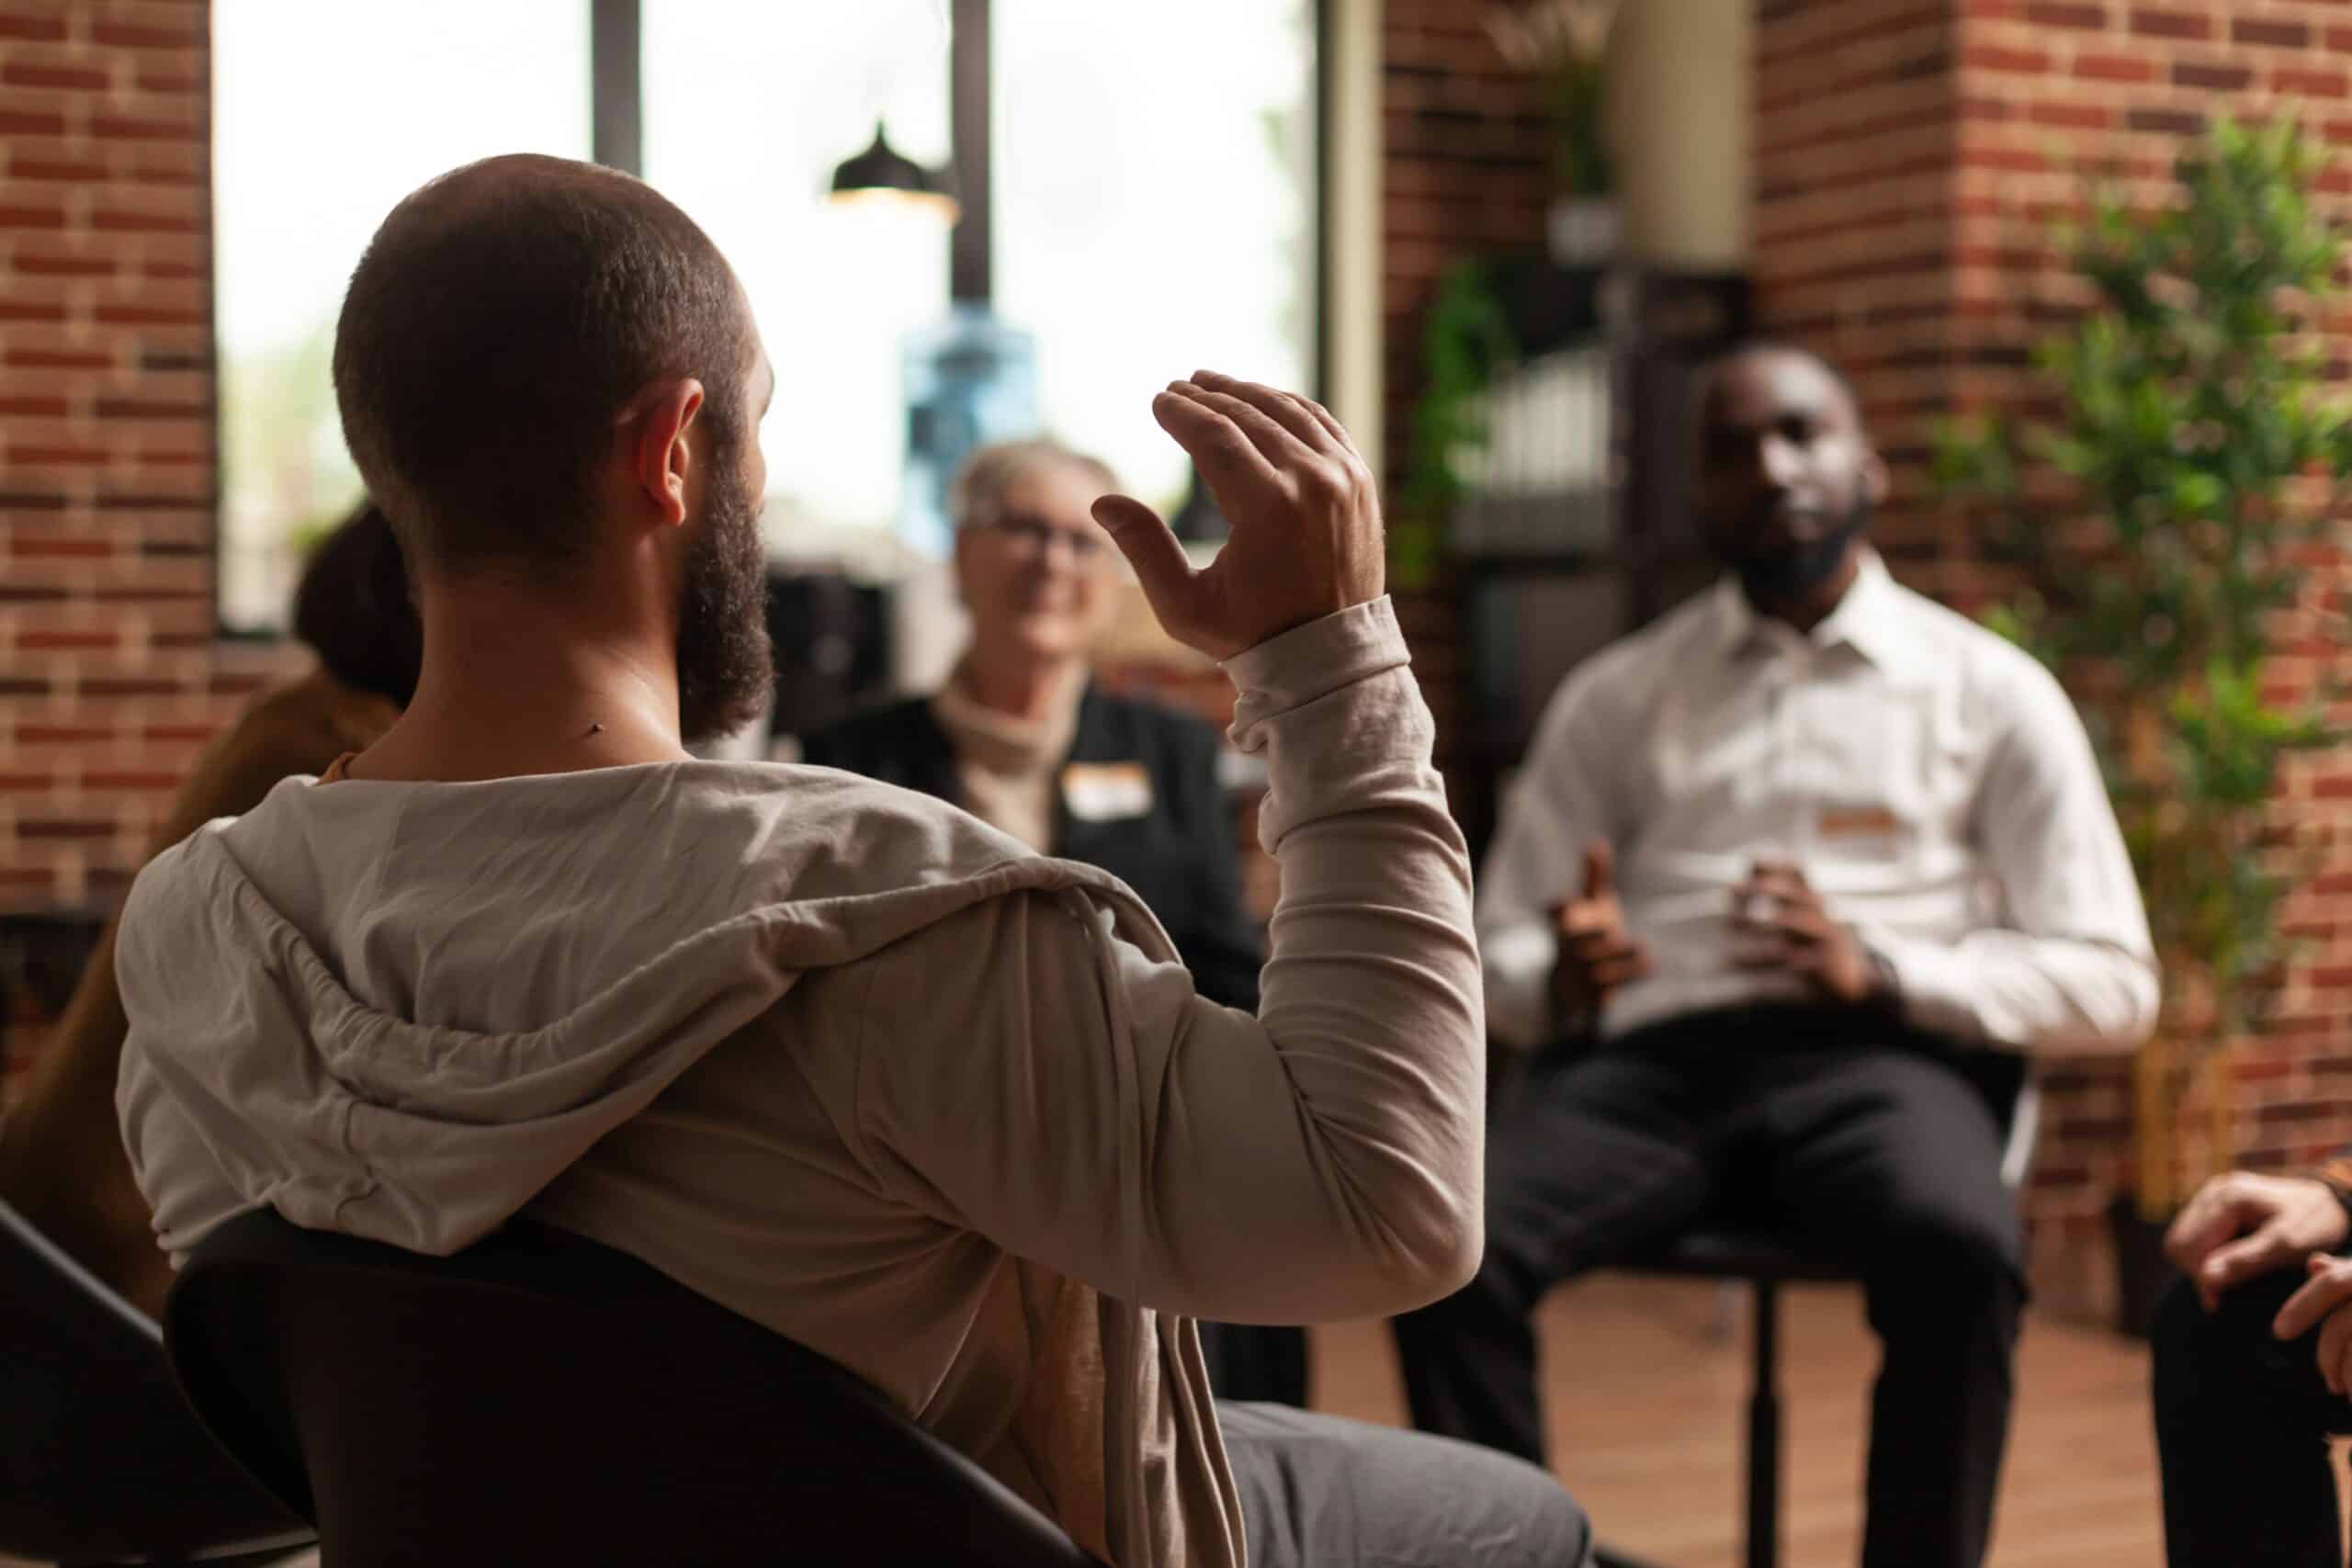 A man discusses behavioral addiction risk factors during a group therapy treatment session.